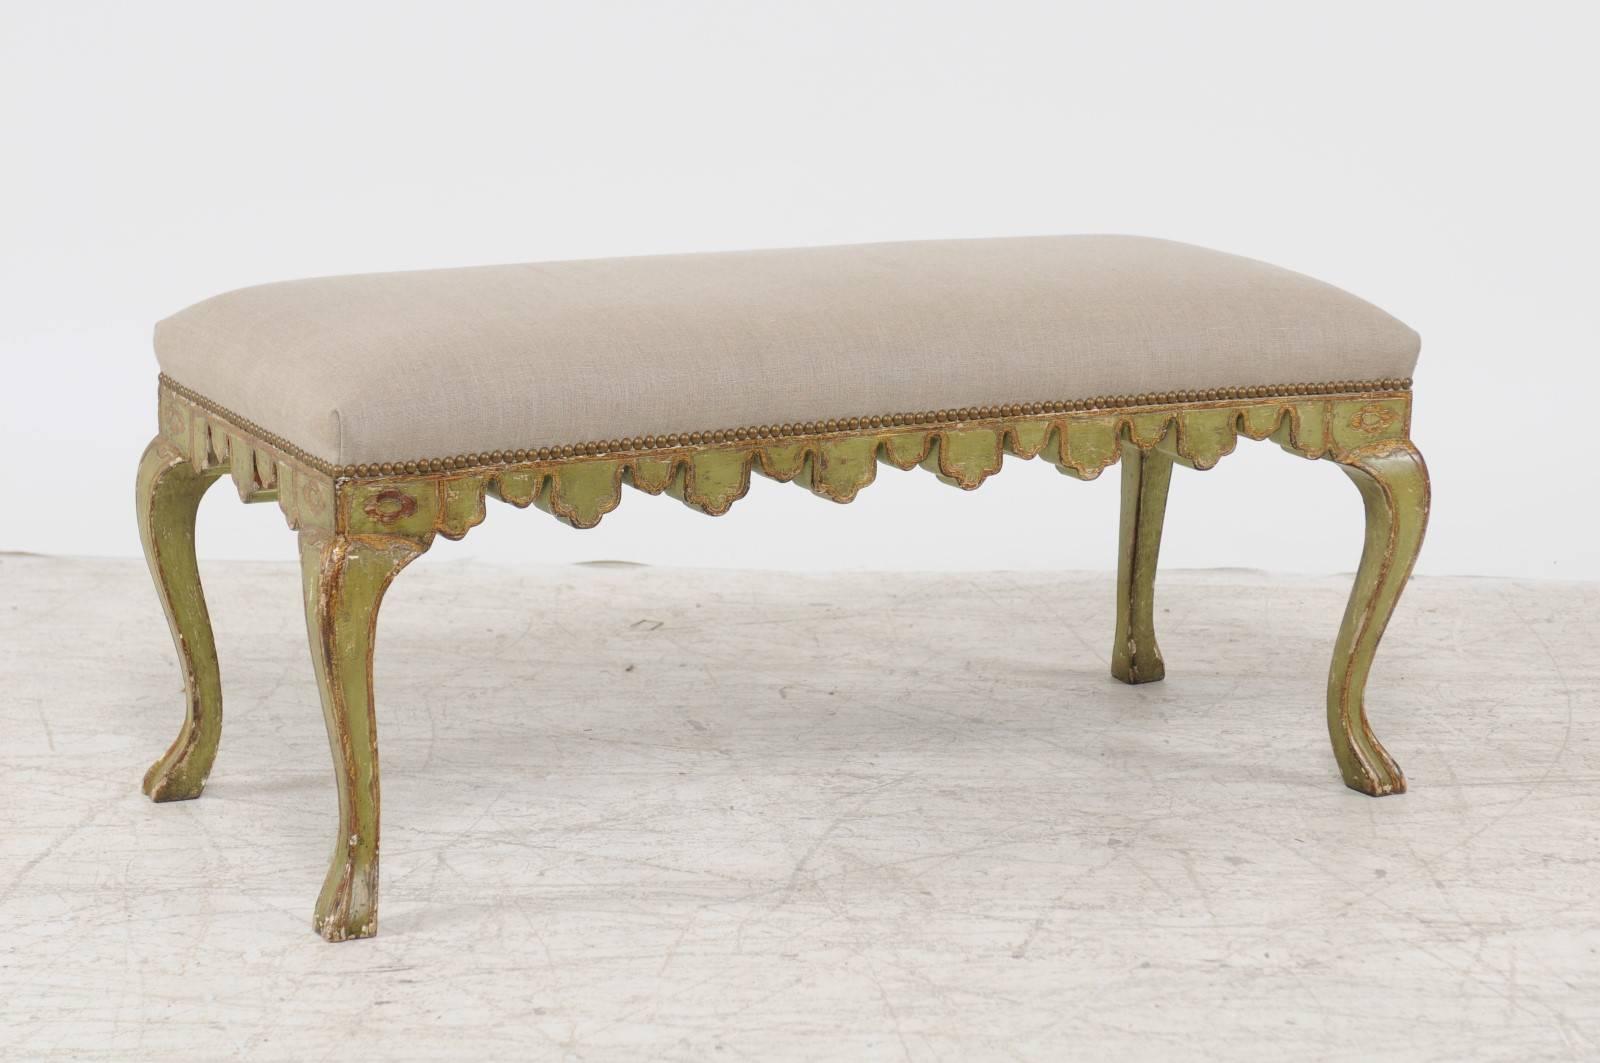 An Italian Rococo style backless painted wood bench from the first half of the 20th century, with newly recovered seat. This Italian bench features a rectangular seat, recovered with a simple linen fabric, accented on the trim with a brass nailhead